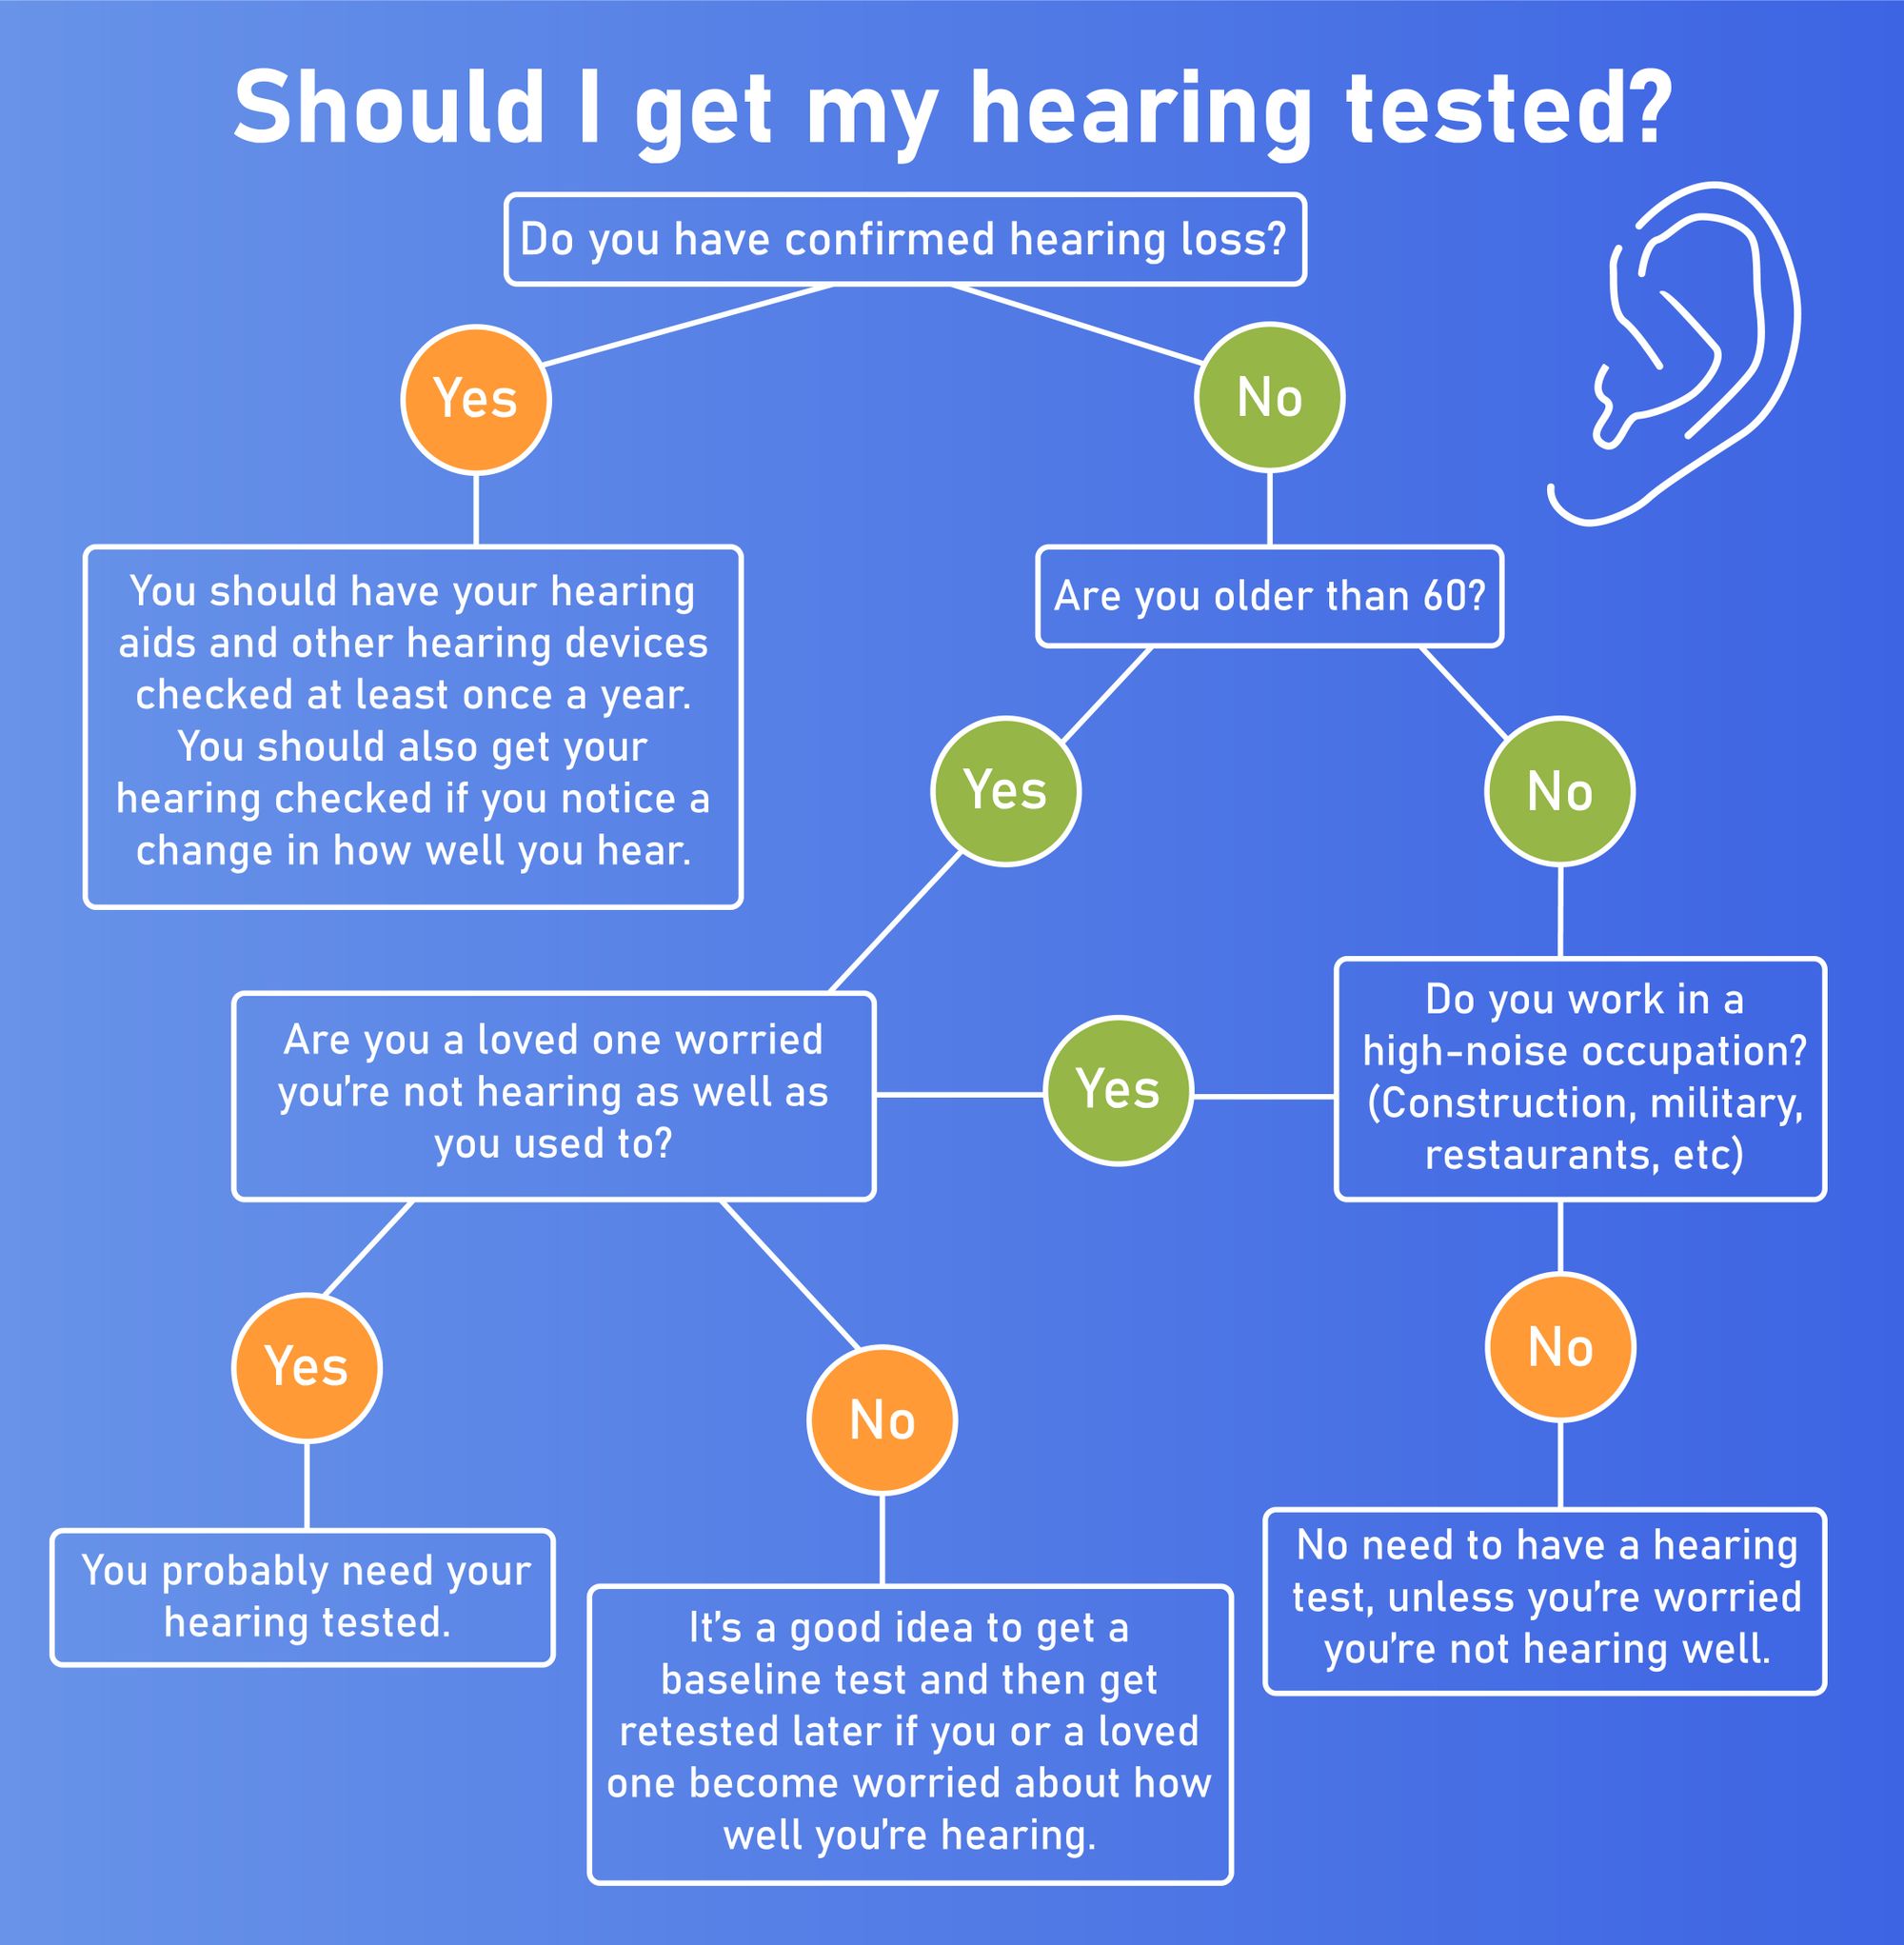 what should you not do before a hearing test